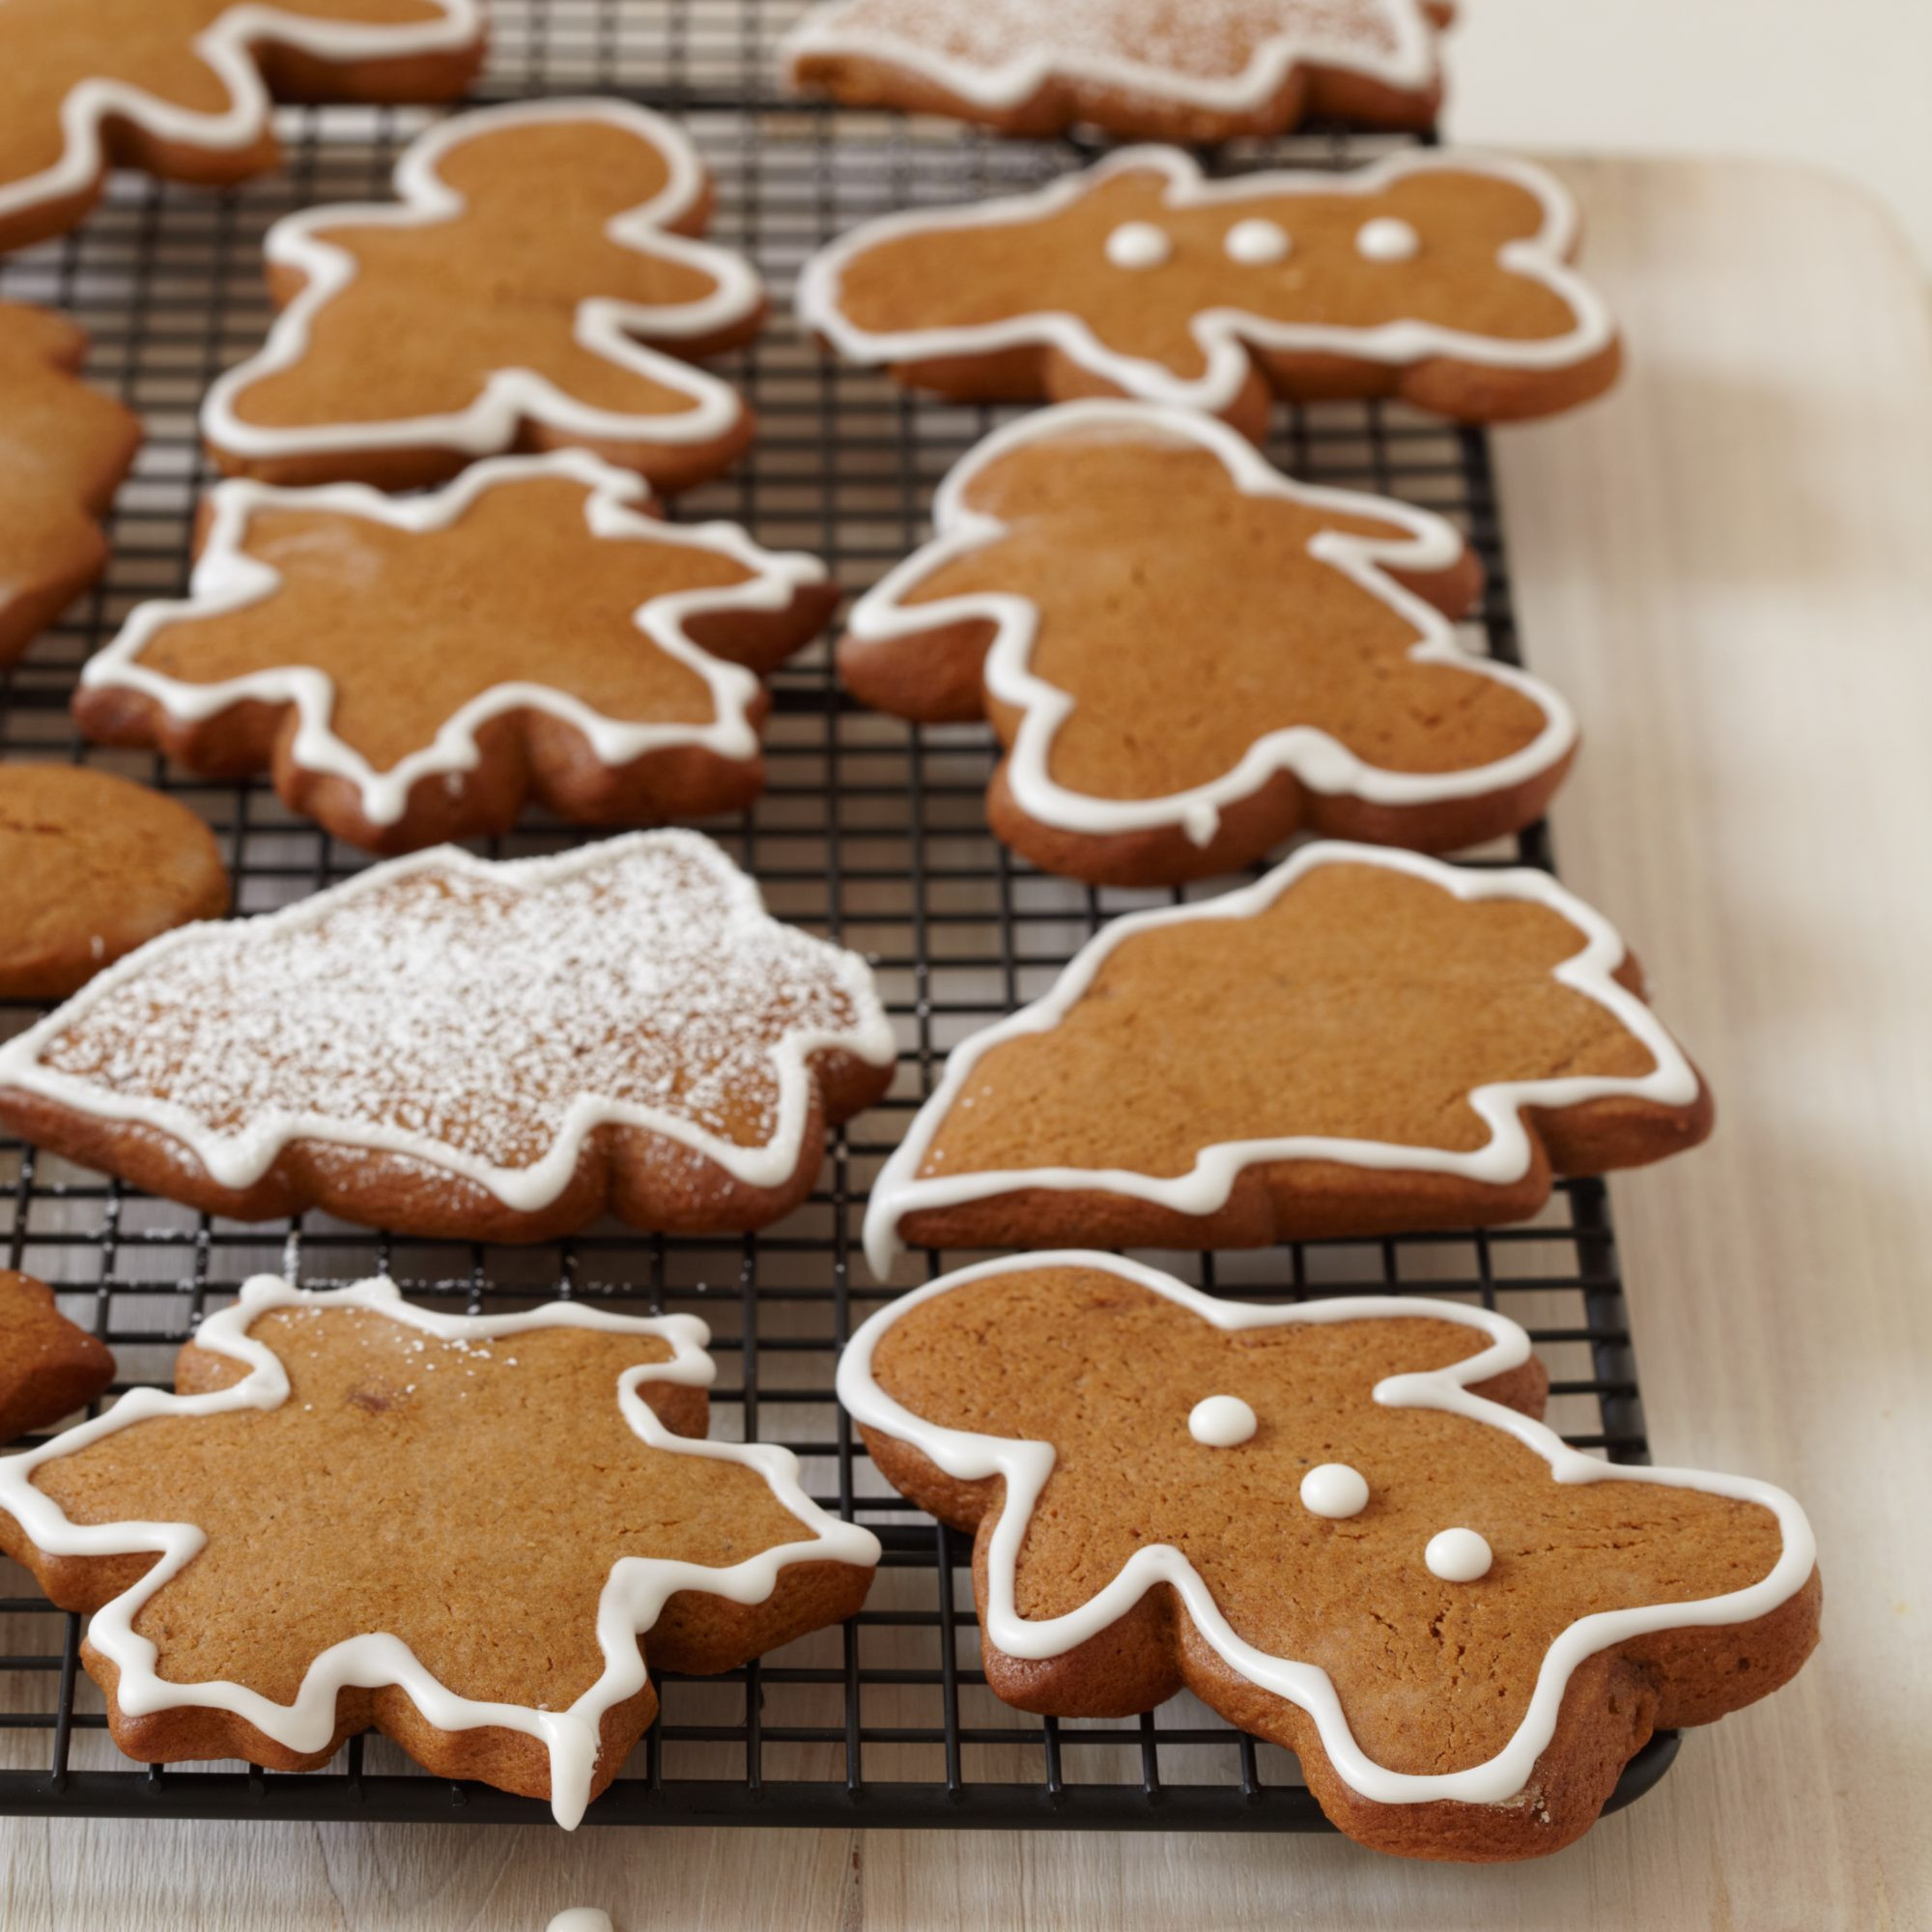 Icing for Gingerbread Cookies Best Of Gingerbread Cookies with Royal Icing Recipe Michael Mina